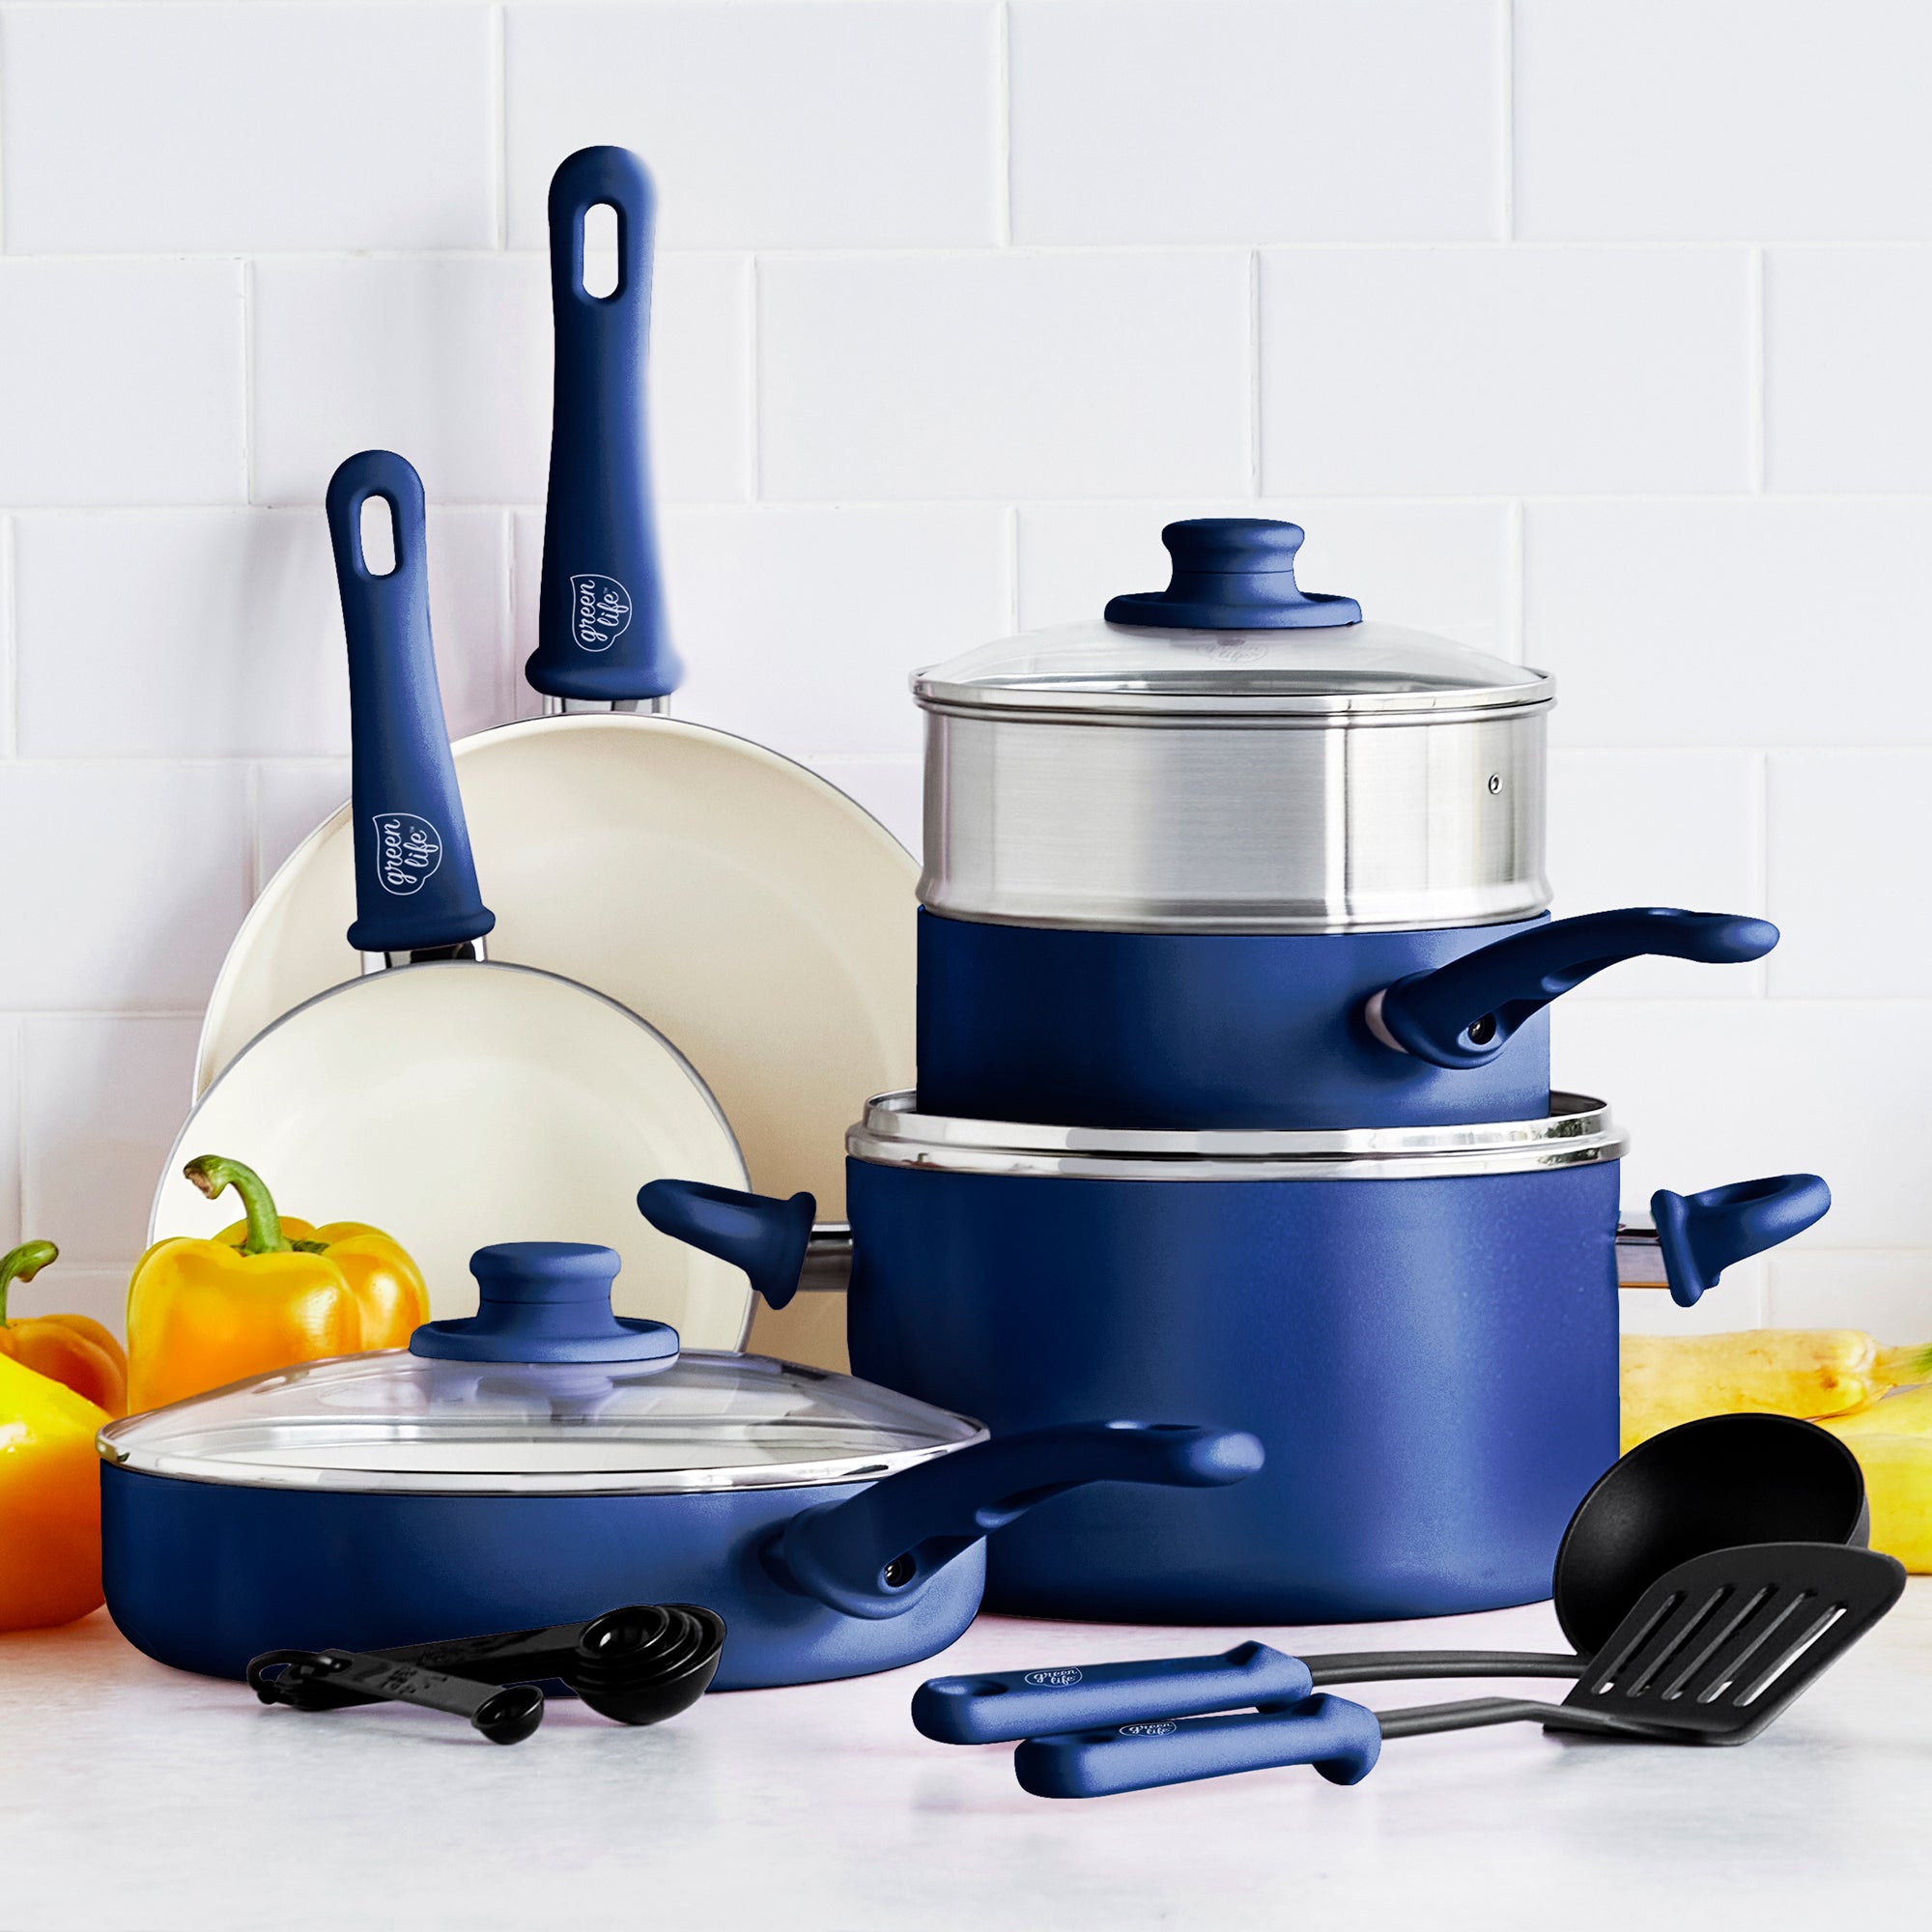 Healthy Non-Toxic Nonstick Cookware Sets - Soft Grip 23-Piece Cookware Set in Blue - by GreenLife